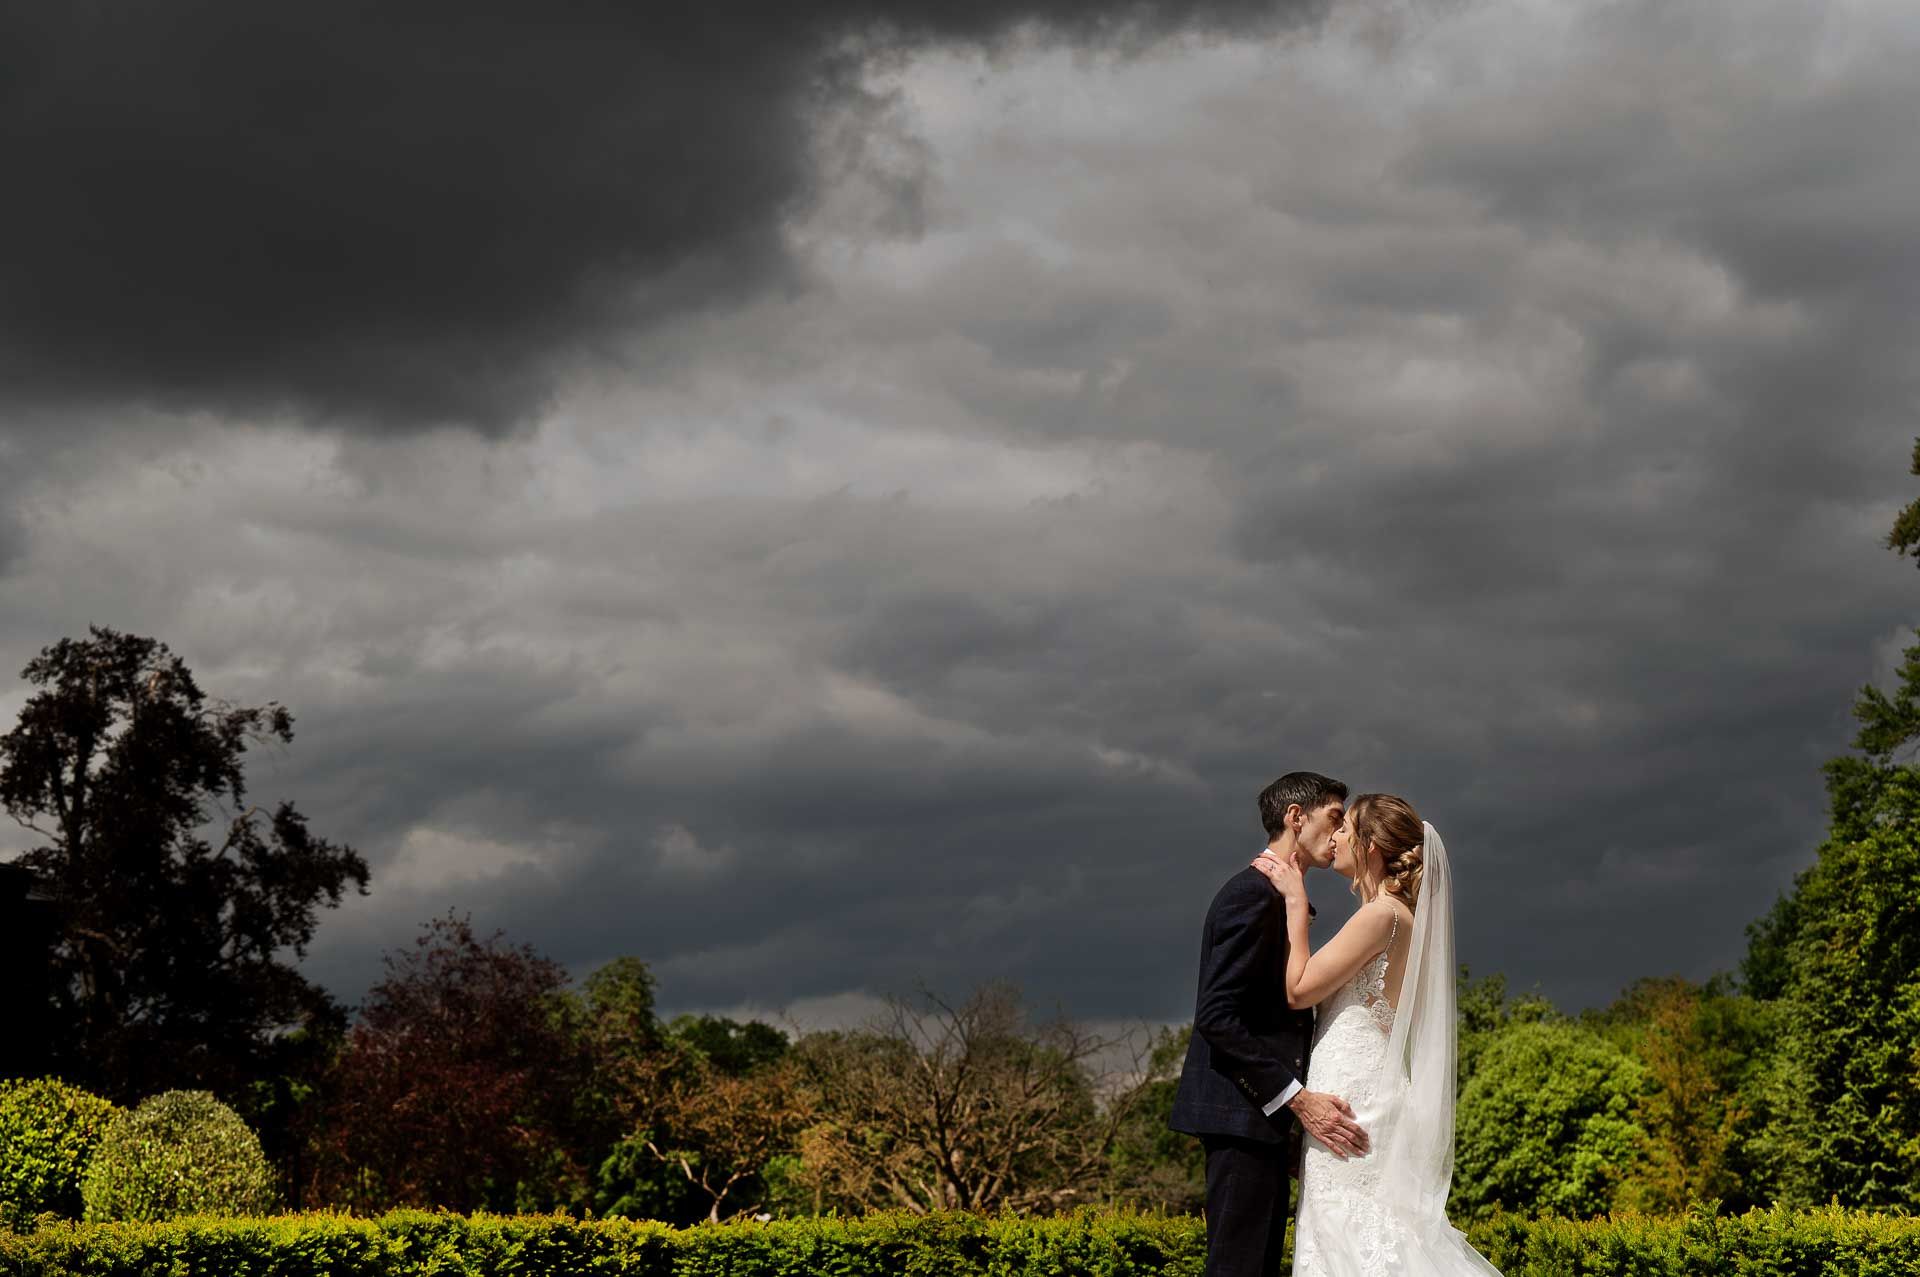 Sophie and Ross kissing in the gardens of Swynford Manor with dark, moody skies behind them. Photography by Fountain Photography. Videography by Veiled Productions.